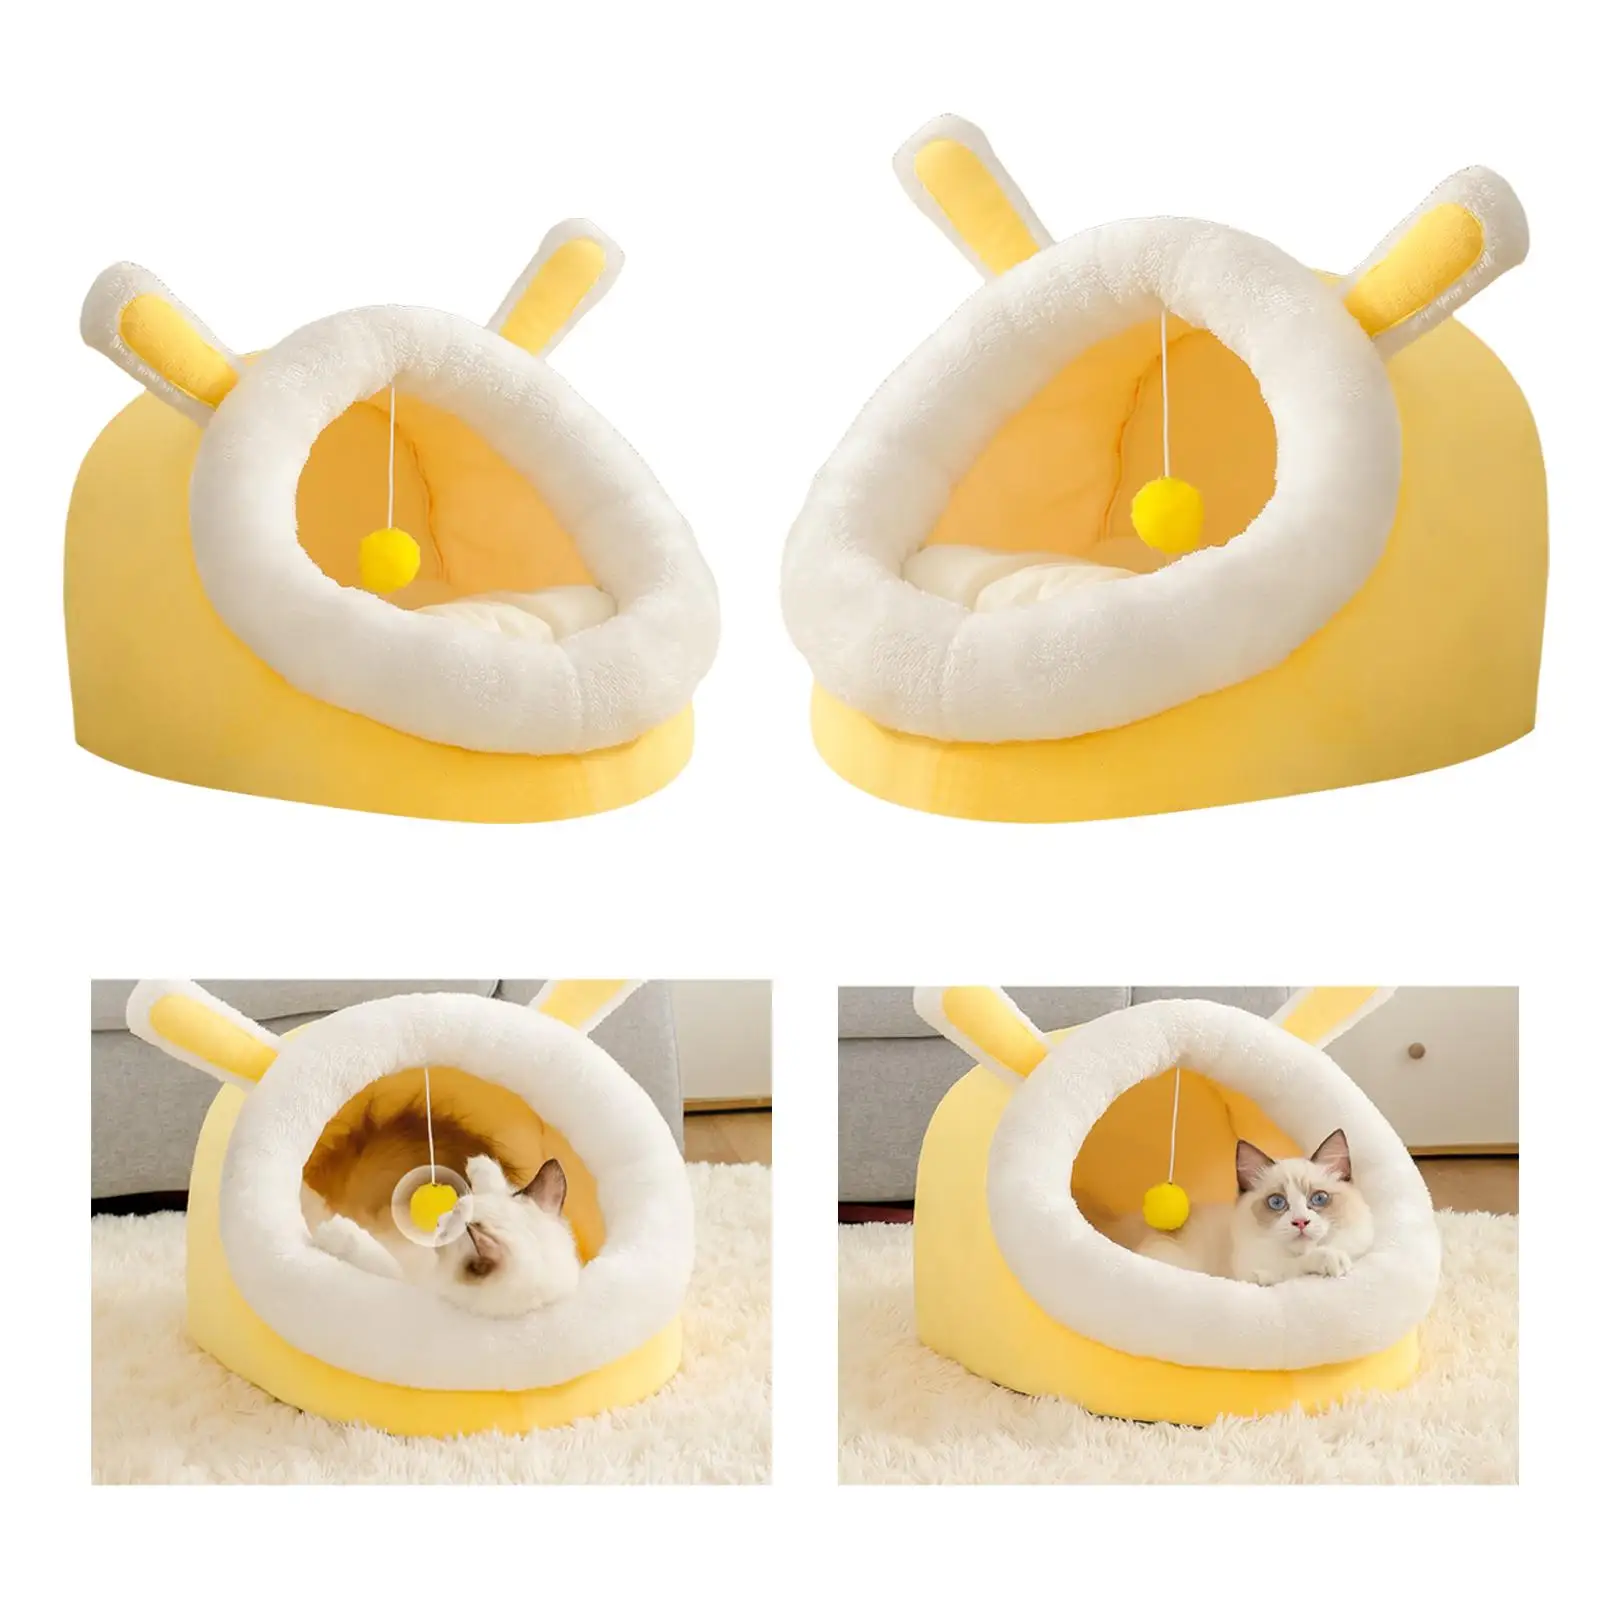 Portable Cave Bed Sleeping Bed Dog House for Small Medium Dog Kitten